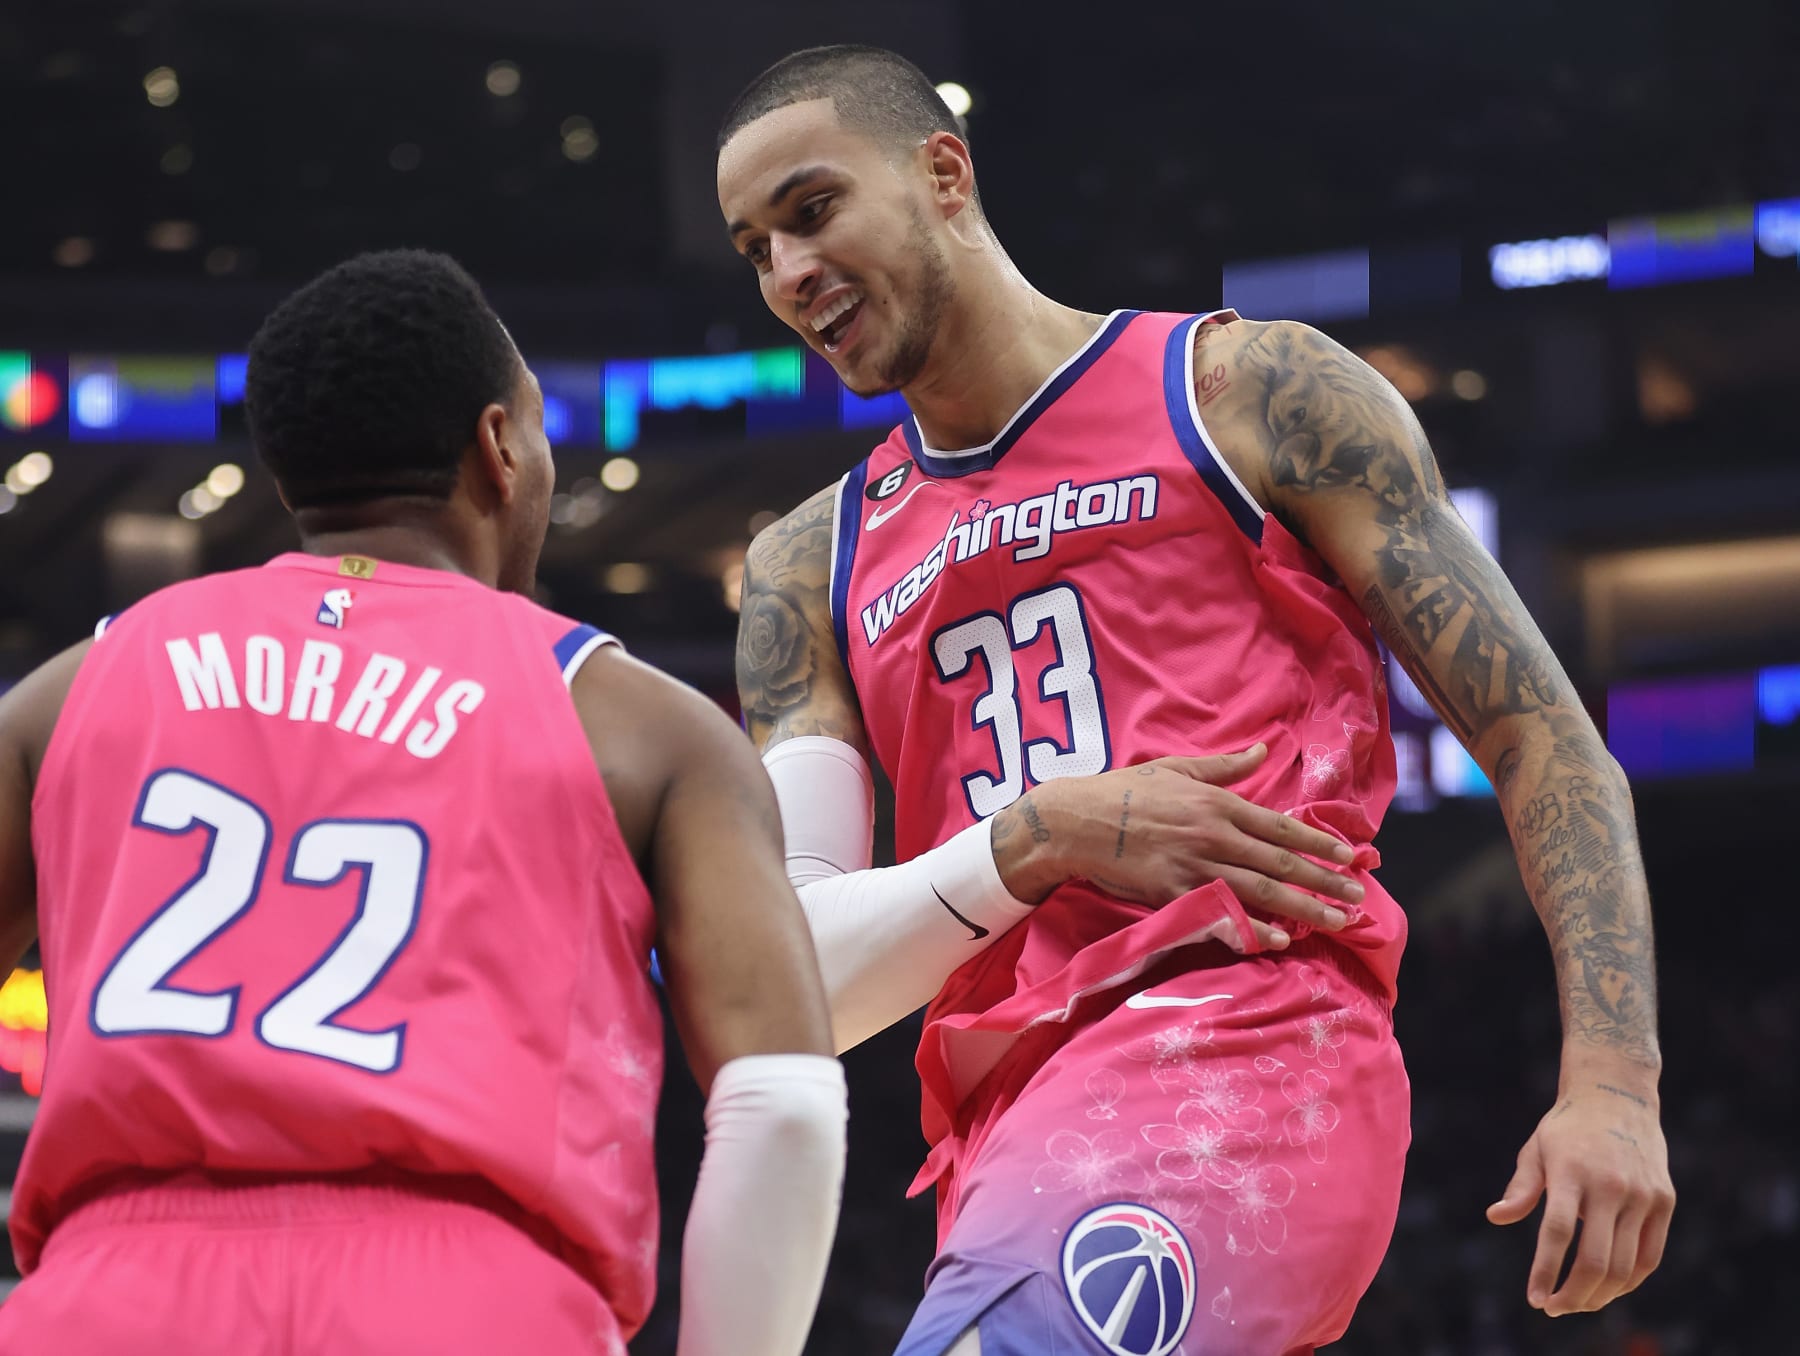 I think it's time, will this be getting pink city edition jersey we've been  waiting for?! : r/washingtonwizards